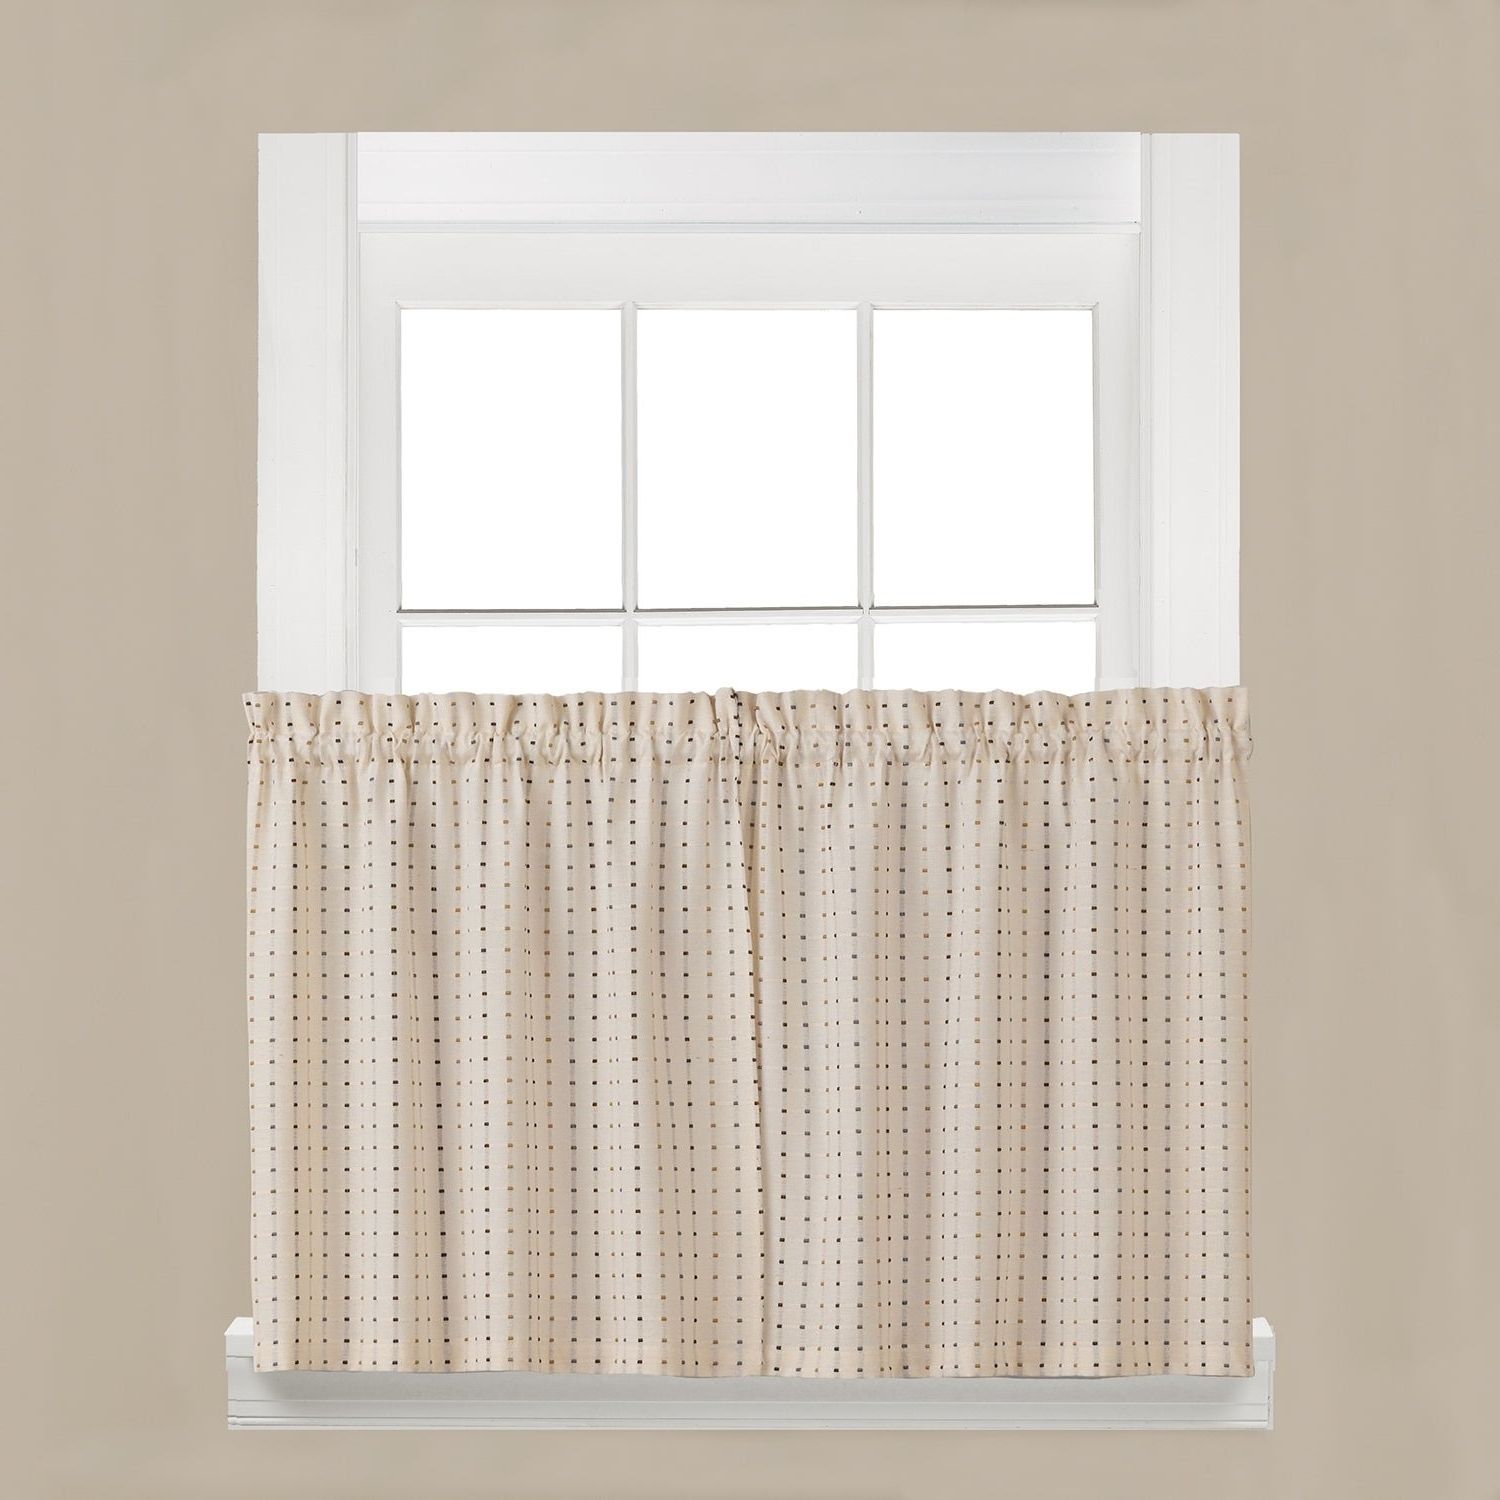 2021 Hopscotch 24 Inch Tier Pairs In Neutral Throughout Skl Home Hopscotch 36 Inch Tier Pair In Neutral (View 3 of 20)